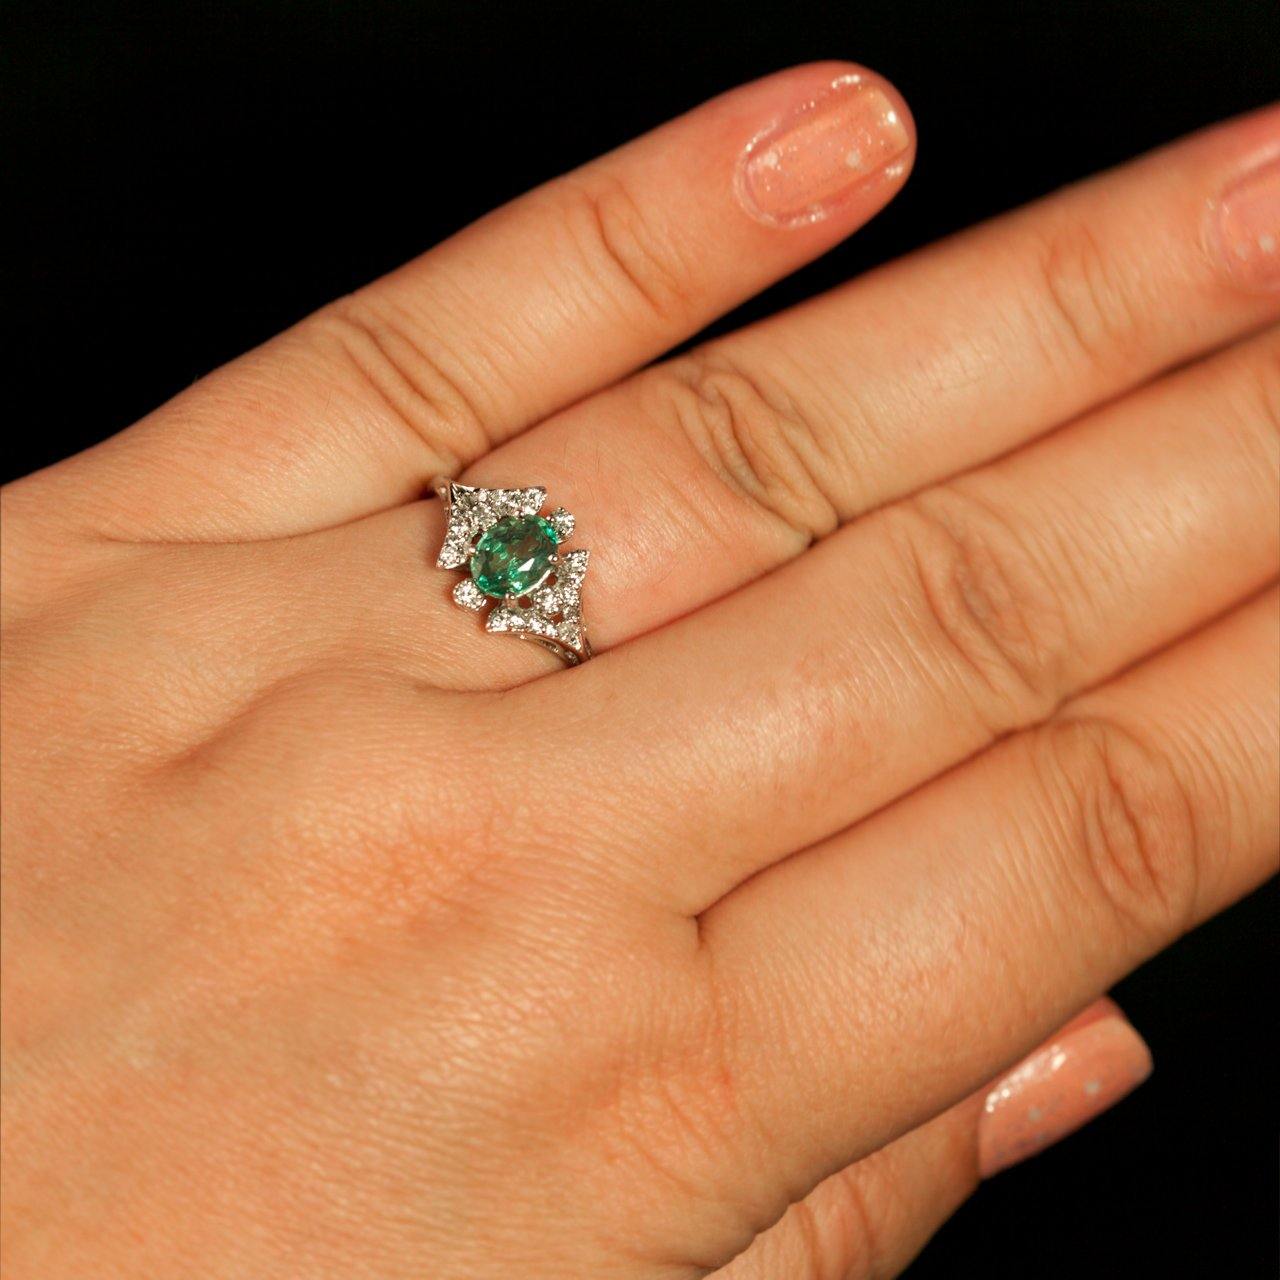 A woman's hand adorned with a 0.68ct alexandrite ring in 18k white gold